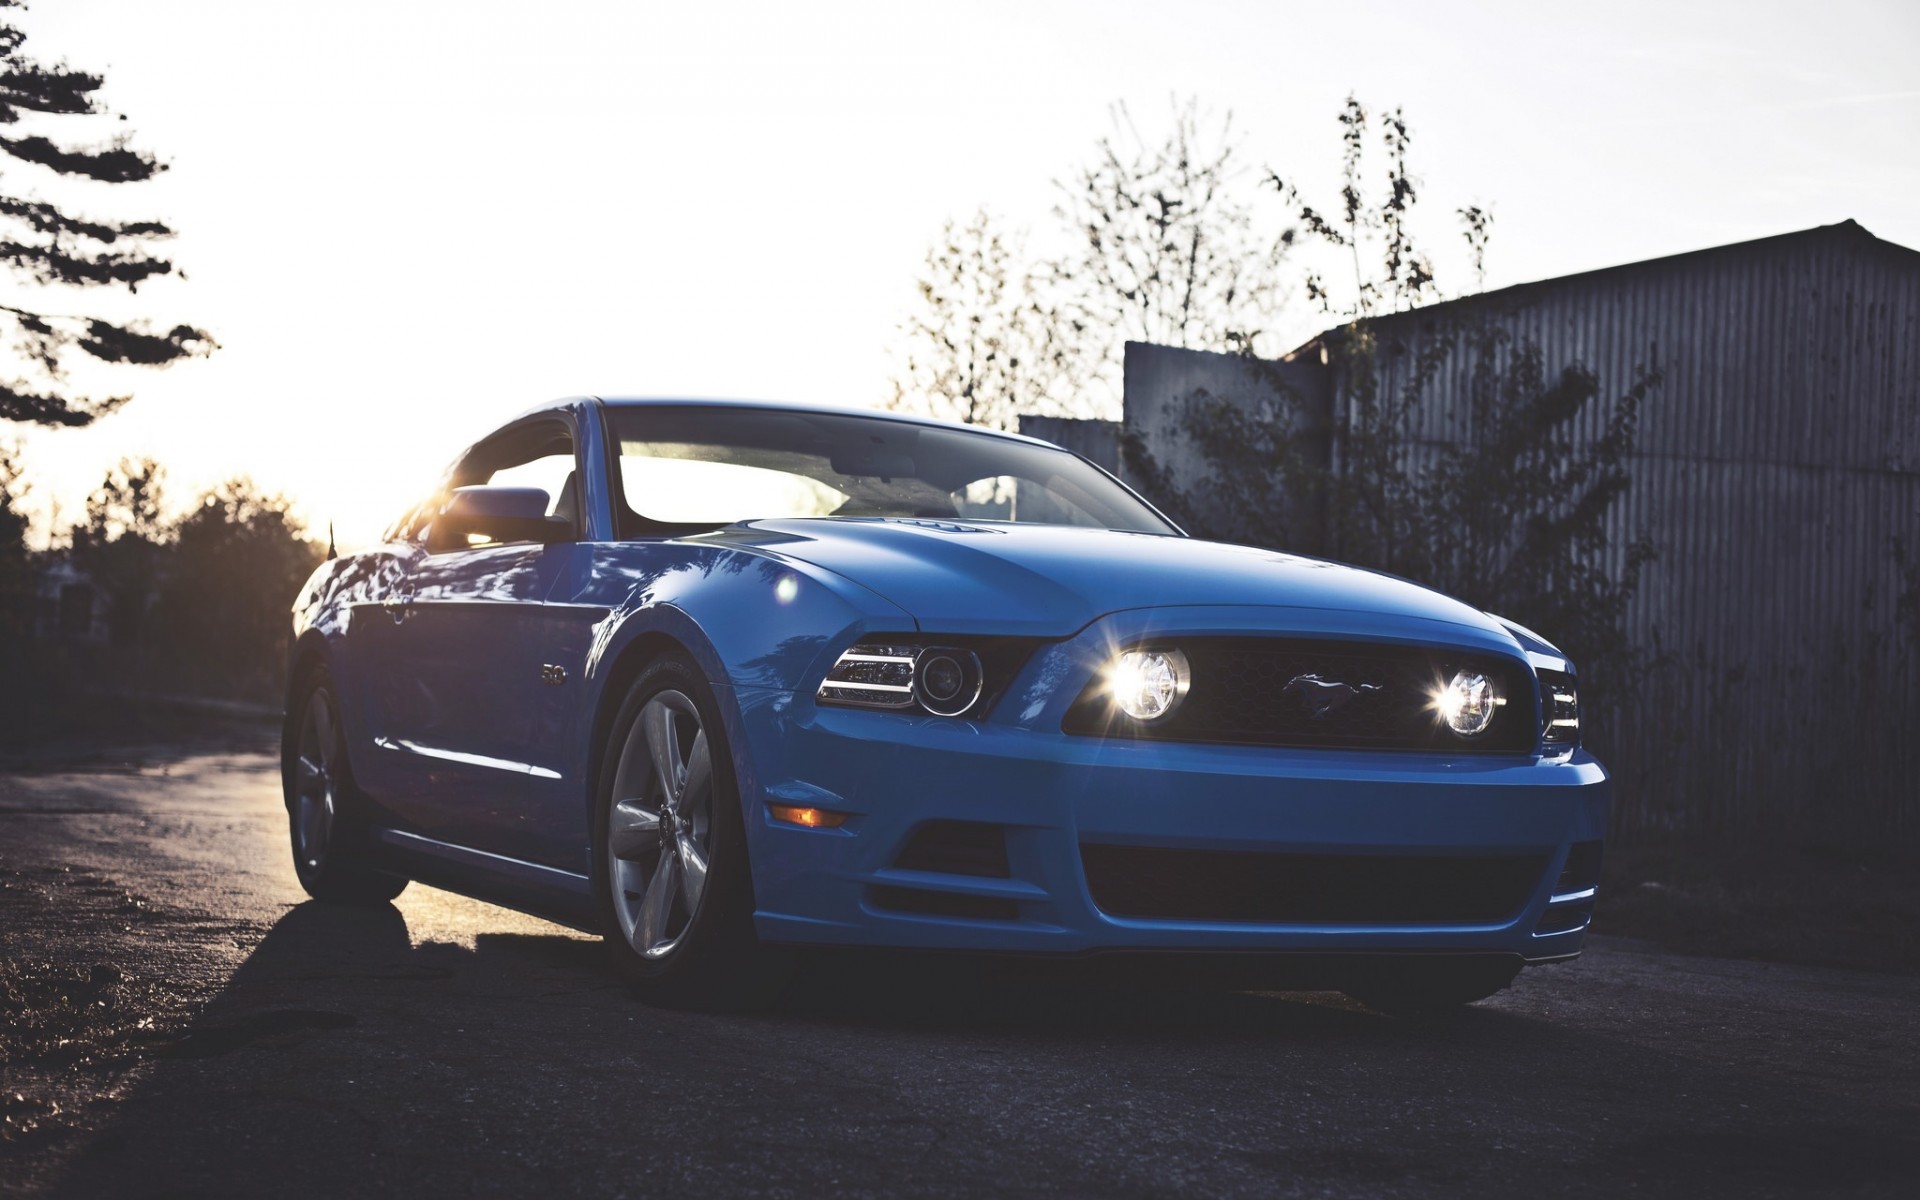 Ford Mustang gt 5.0 Blue